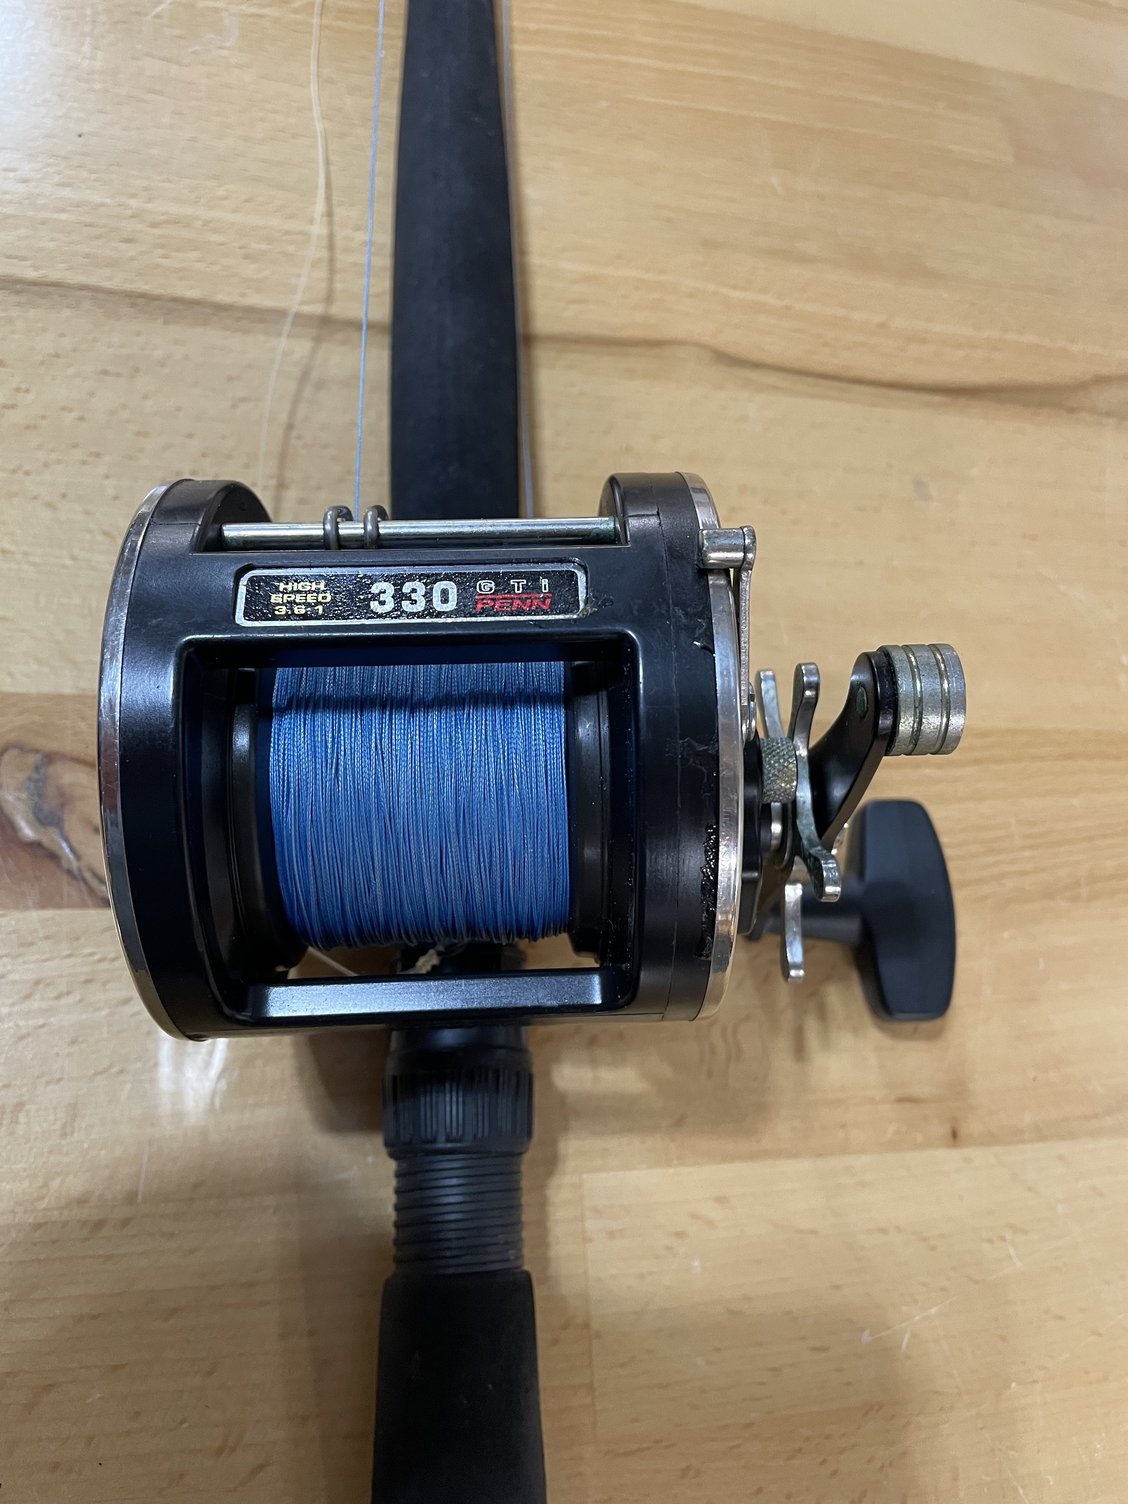 SOLD: New Penn 330gt2 Slammer rod combo - The Hull Truth - Boating and  Fishing Forum